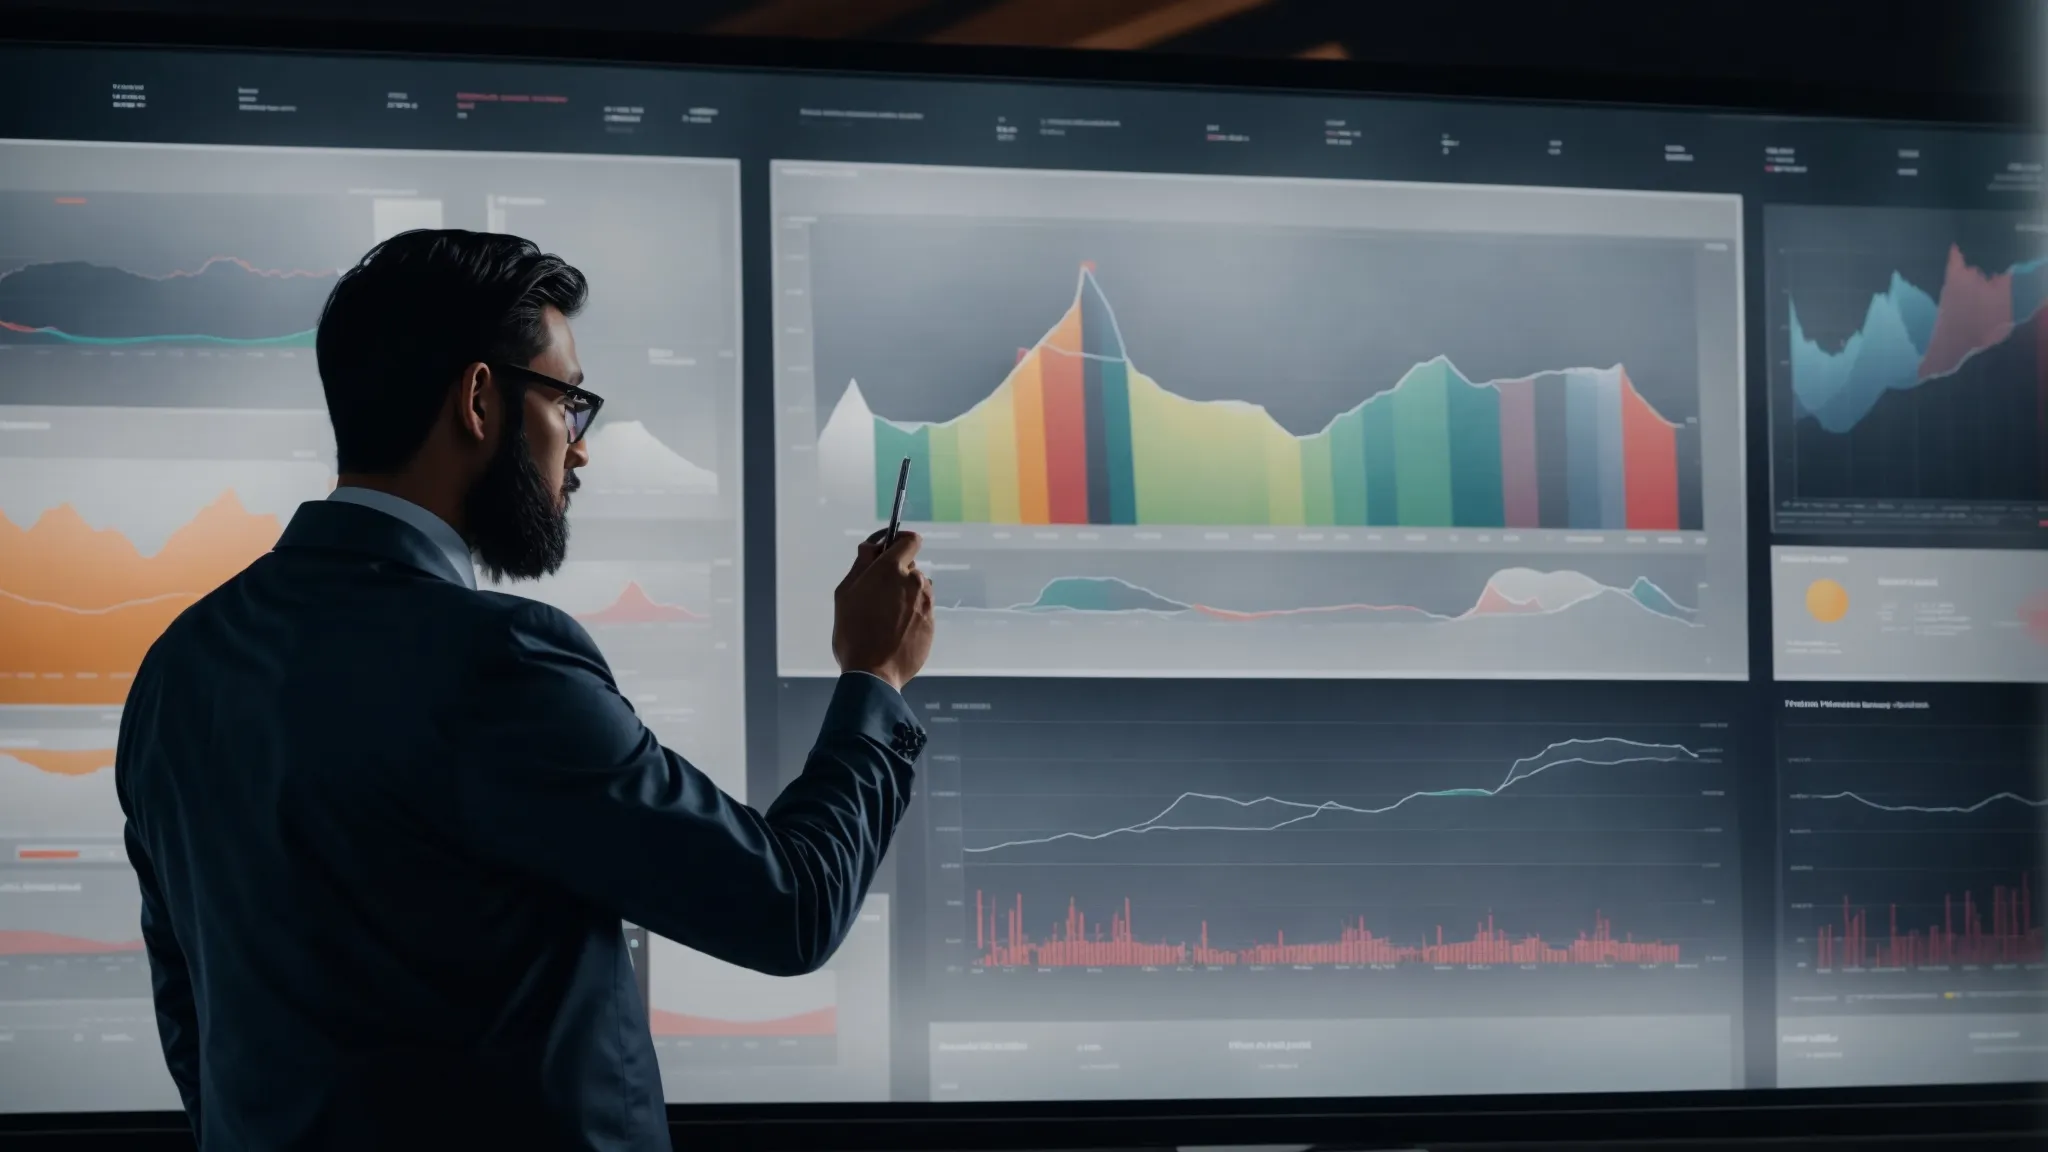 a marketer is analyzing graphs and charts on a large screen that compares website traffic data.